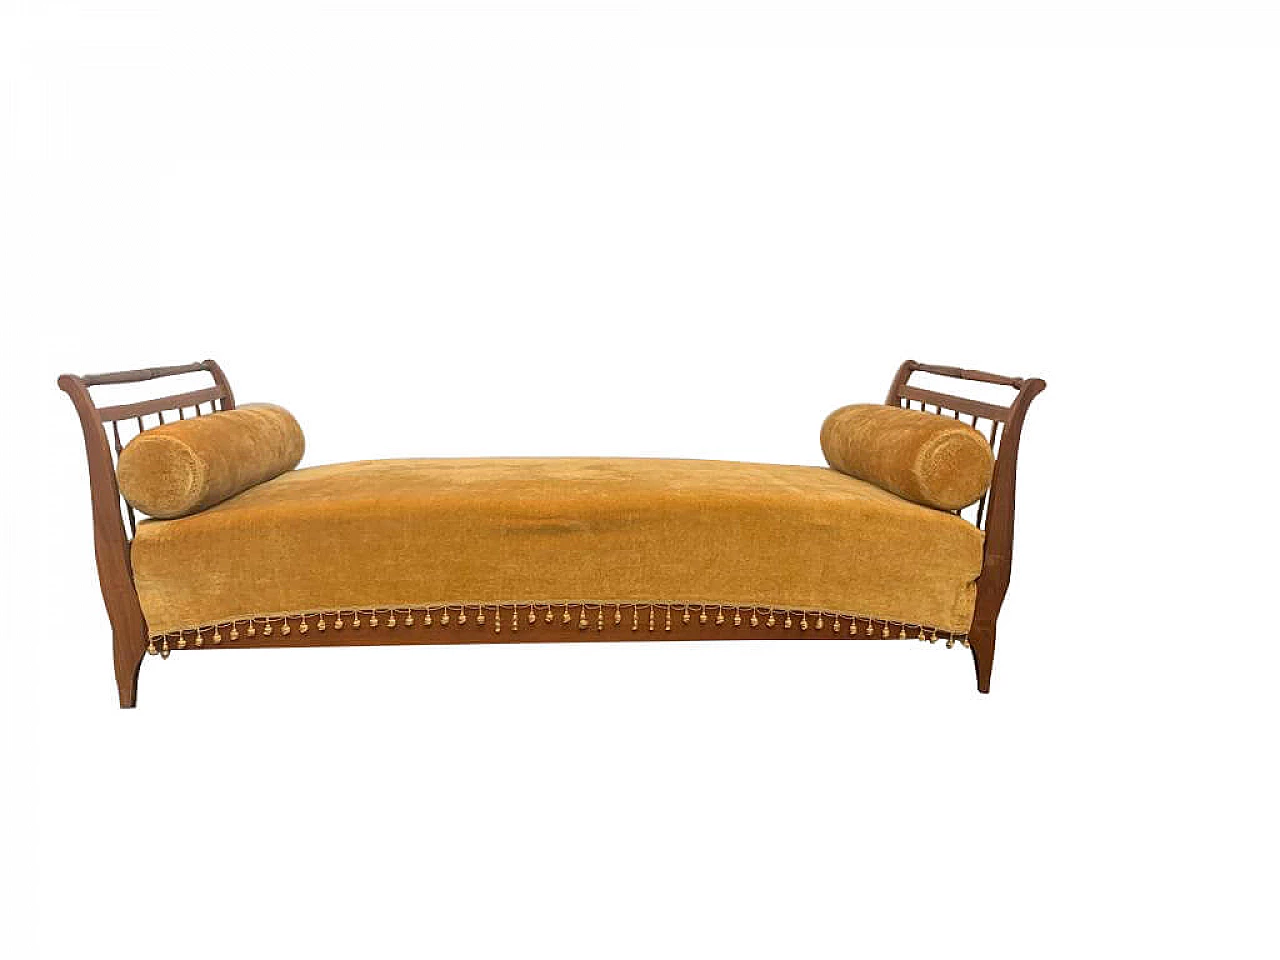 Cherry daybed wood sofa with yellow cover, early 20th century 1116369